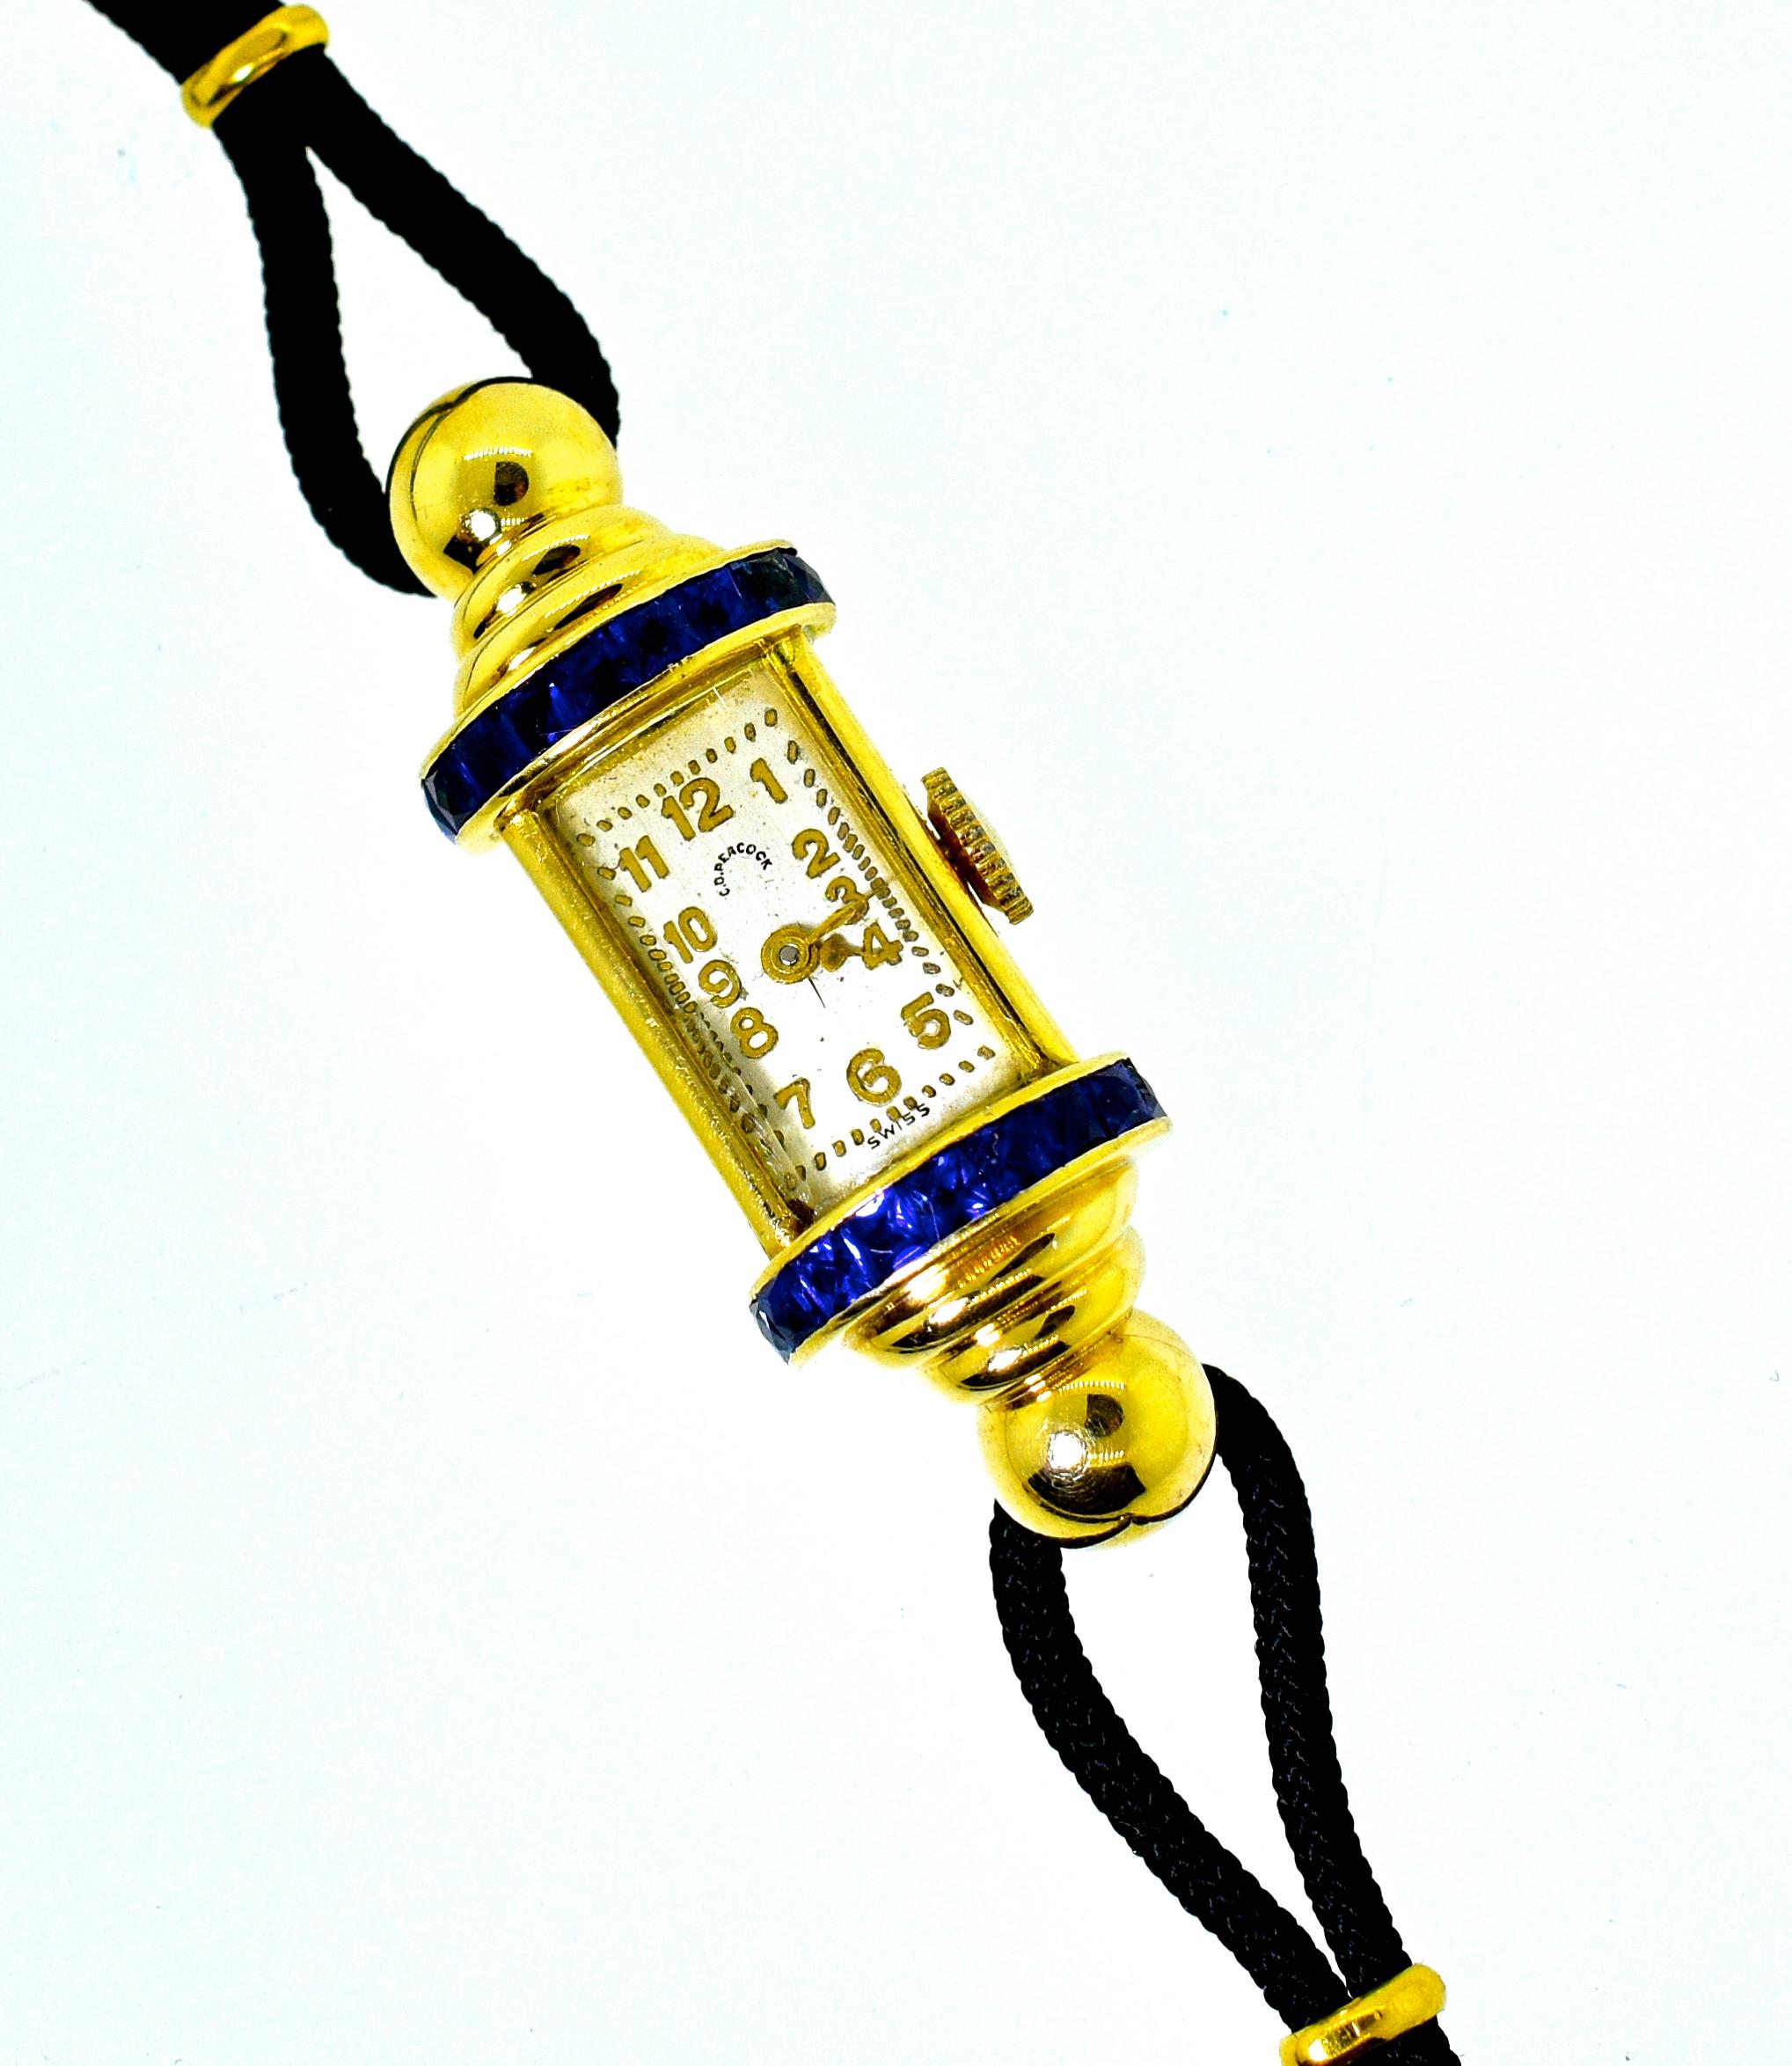 C.D. Peacock, a fine and collected early 20th century watch company has made this ladies wristwatch which has a strong retro, Art Moderne, design.  There are 18 natural French cut sapphires, probably unheated Burma stones, as evident of their fine